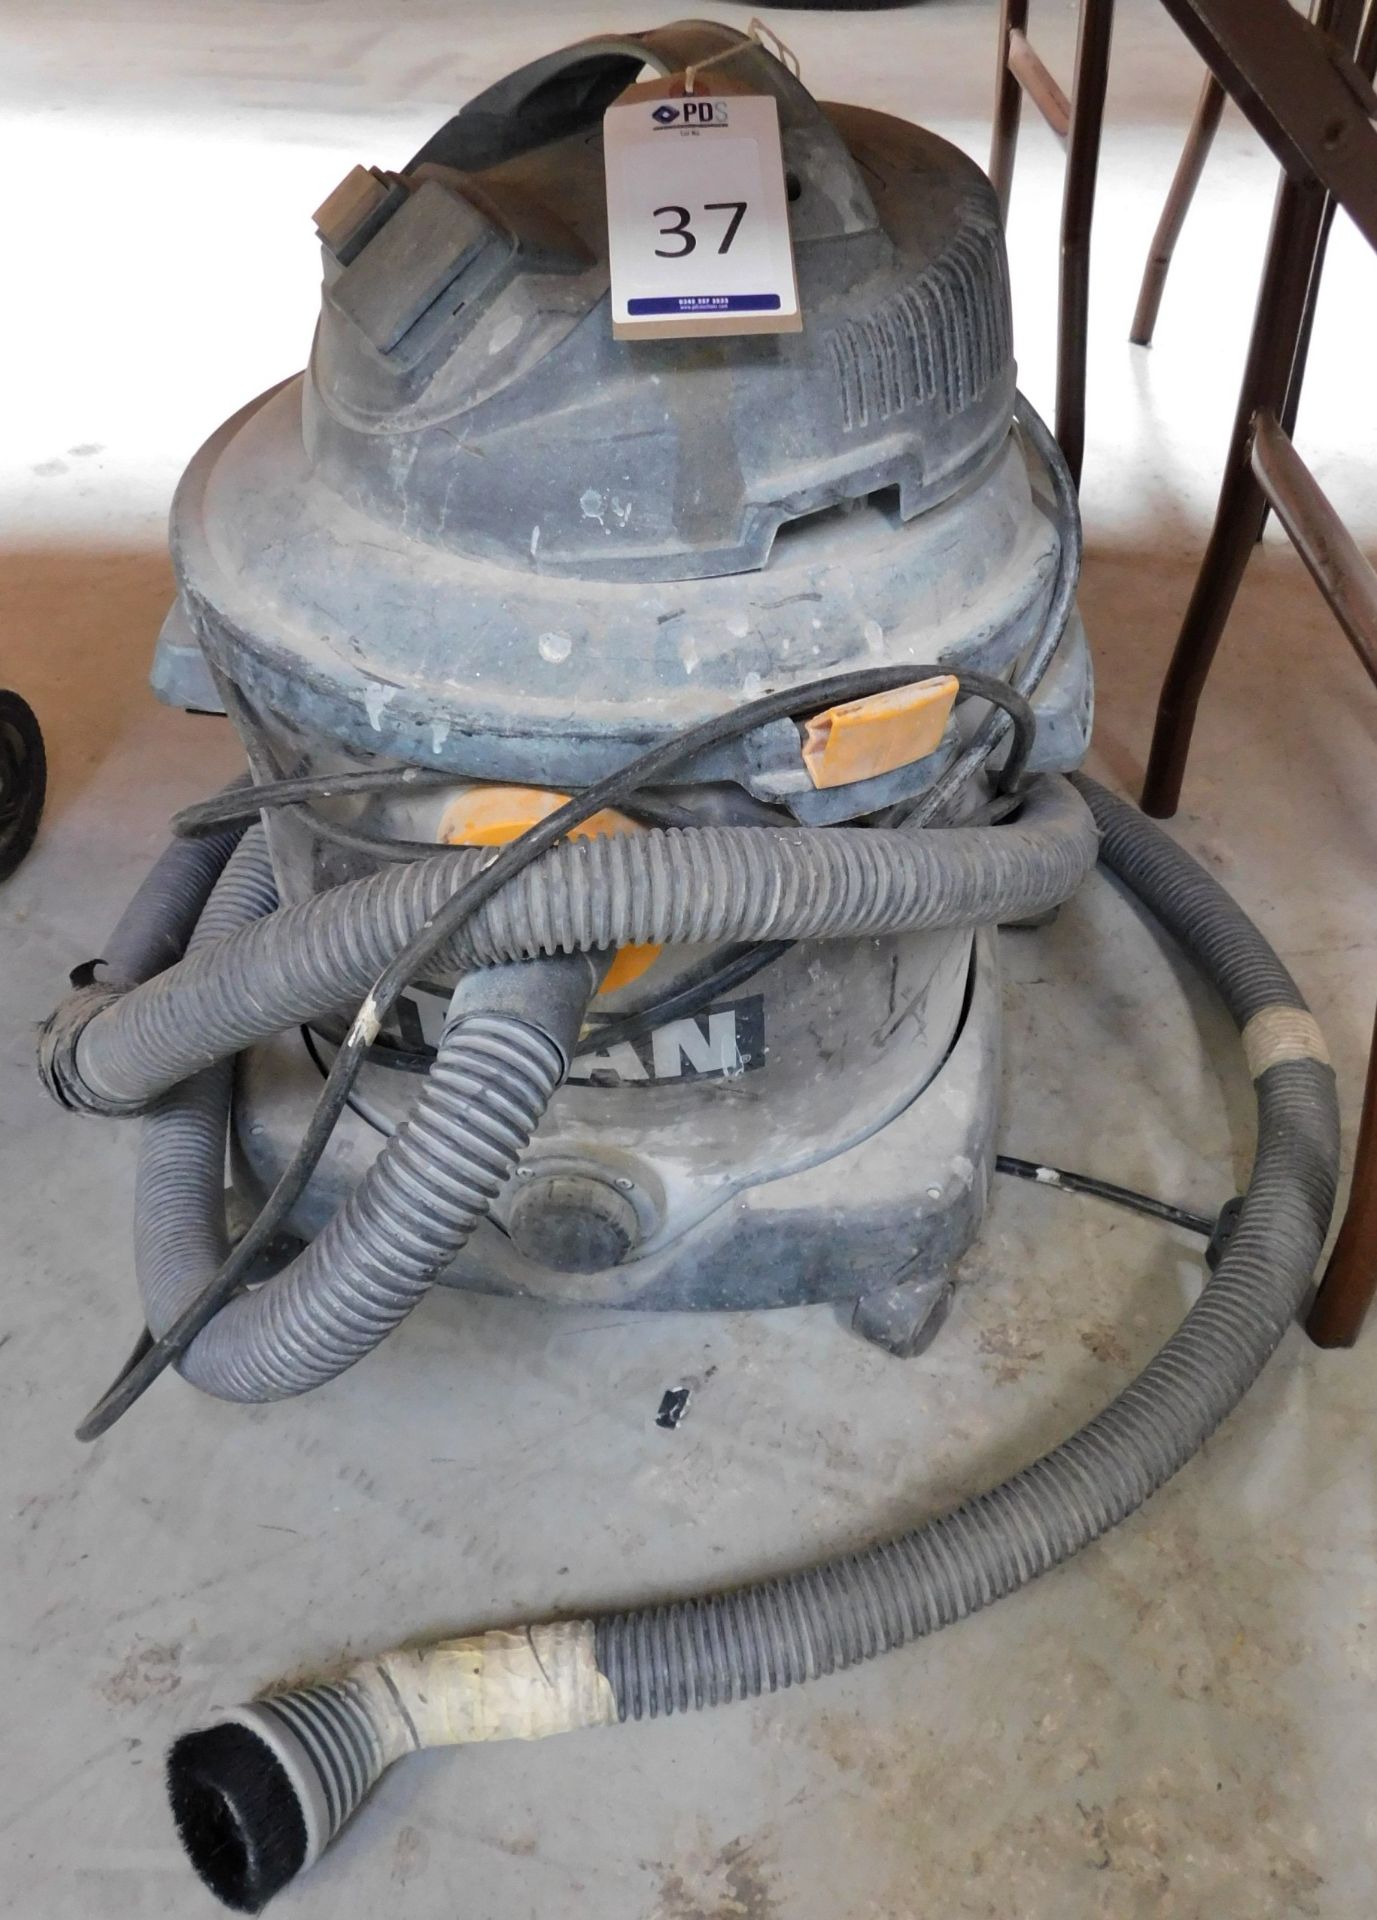 Titan Cylinder Vacuum Cleaner (Location: Brentwood. Please Refer to General Notes)